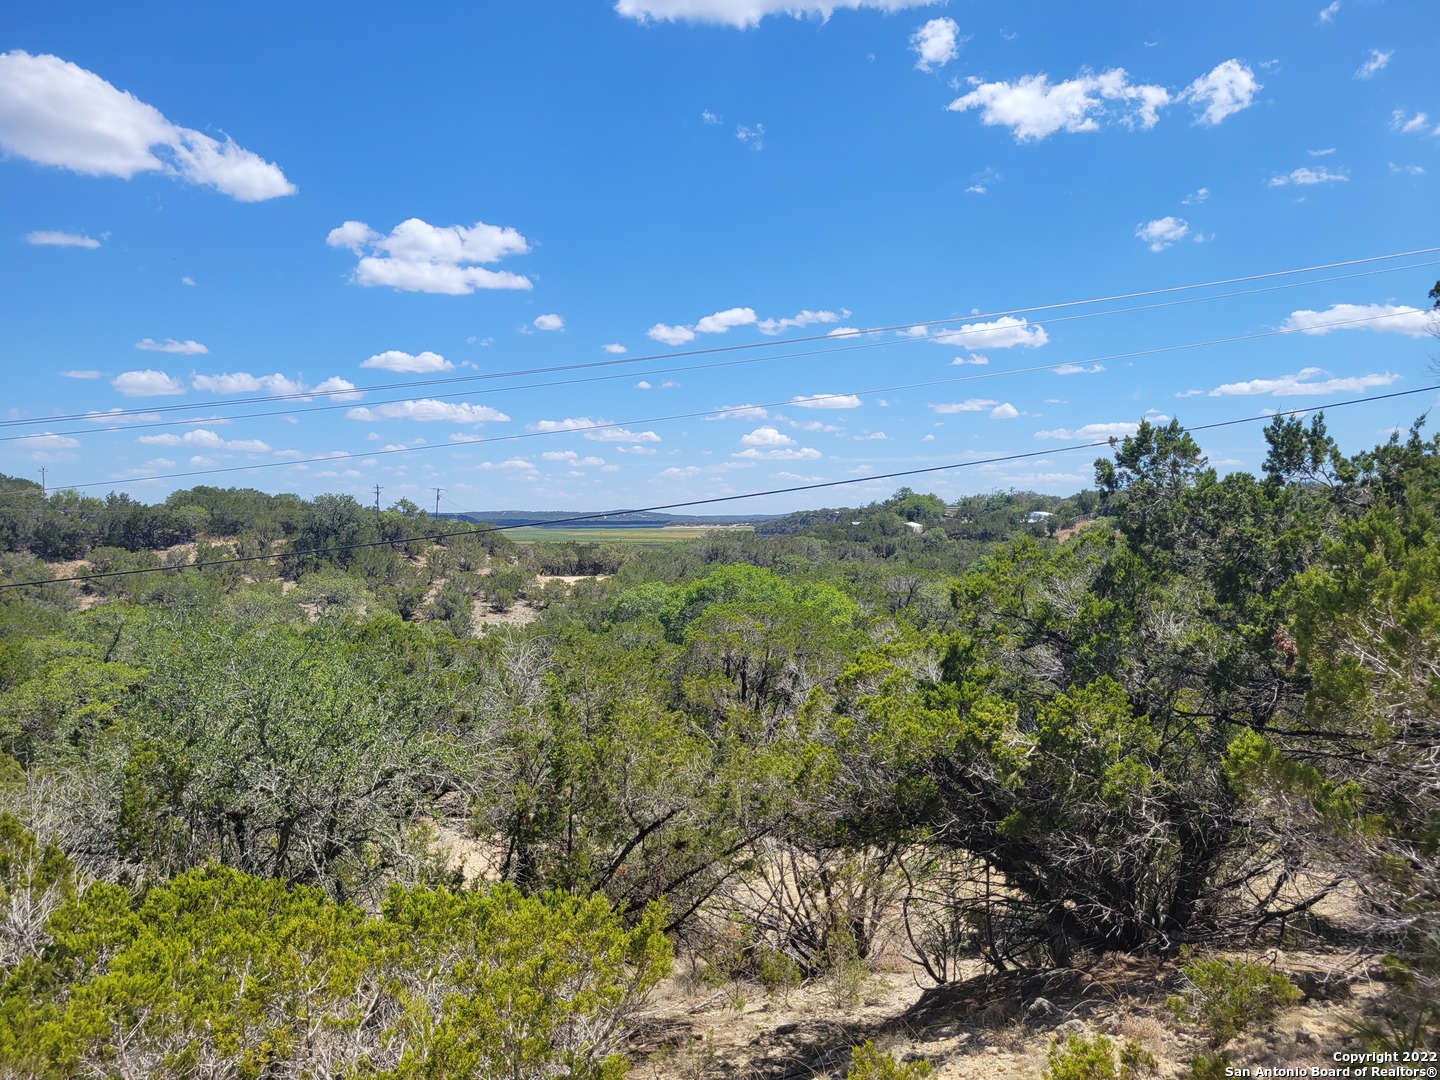 Photo of Lots 24-26 Overland & Fossil Rock in Bandera, TX